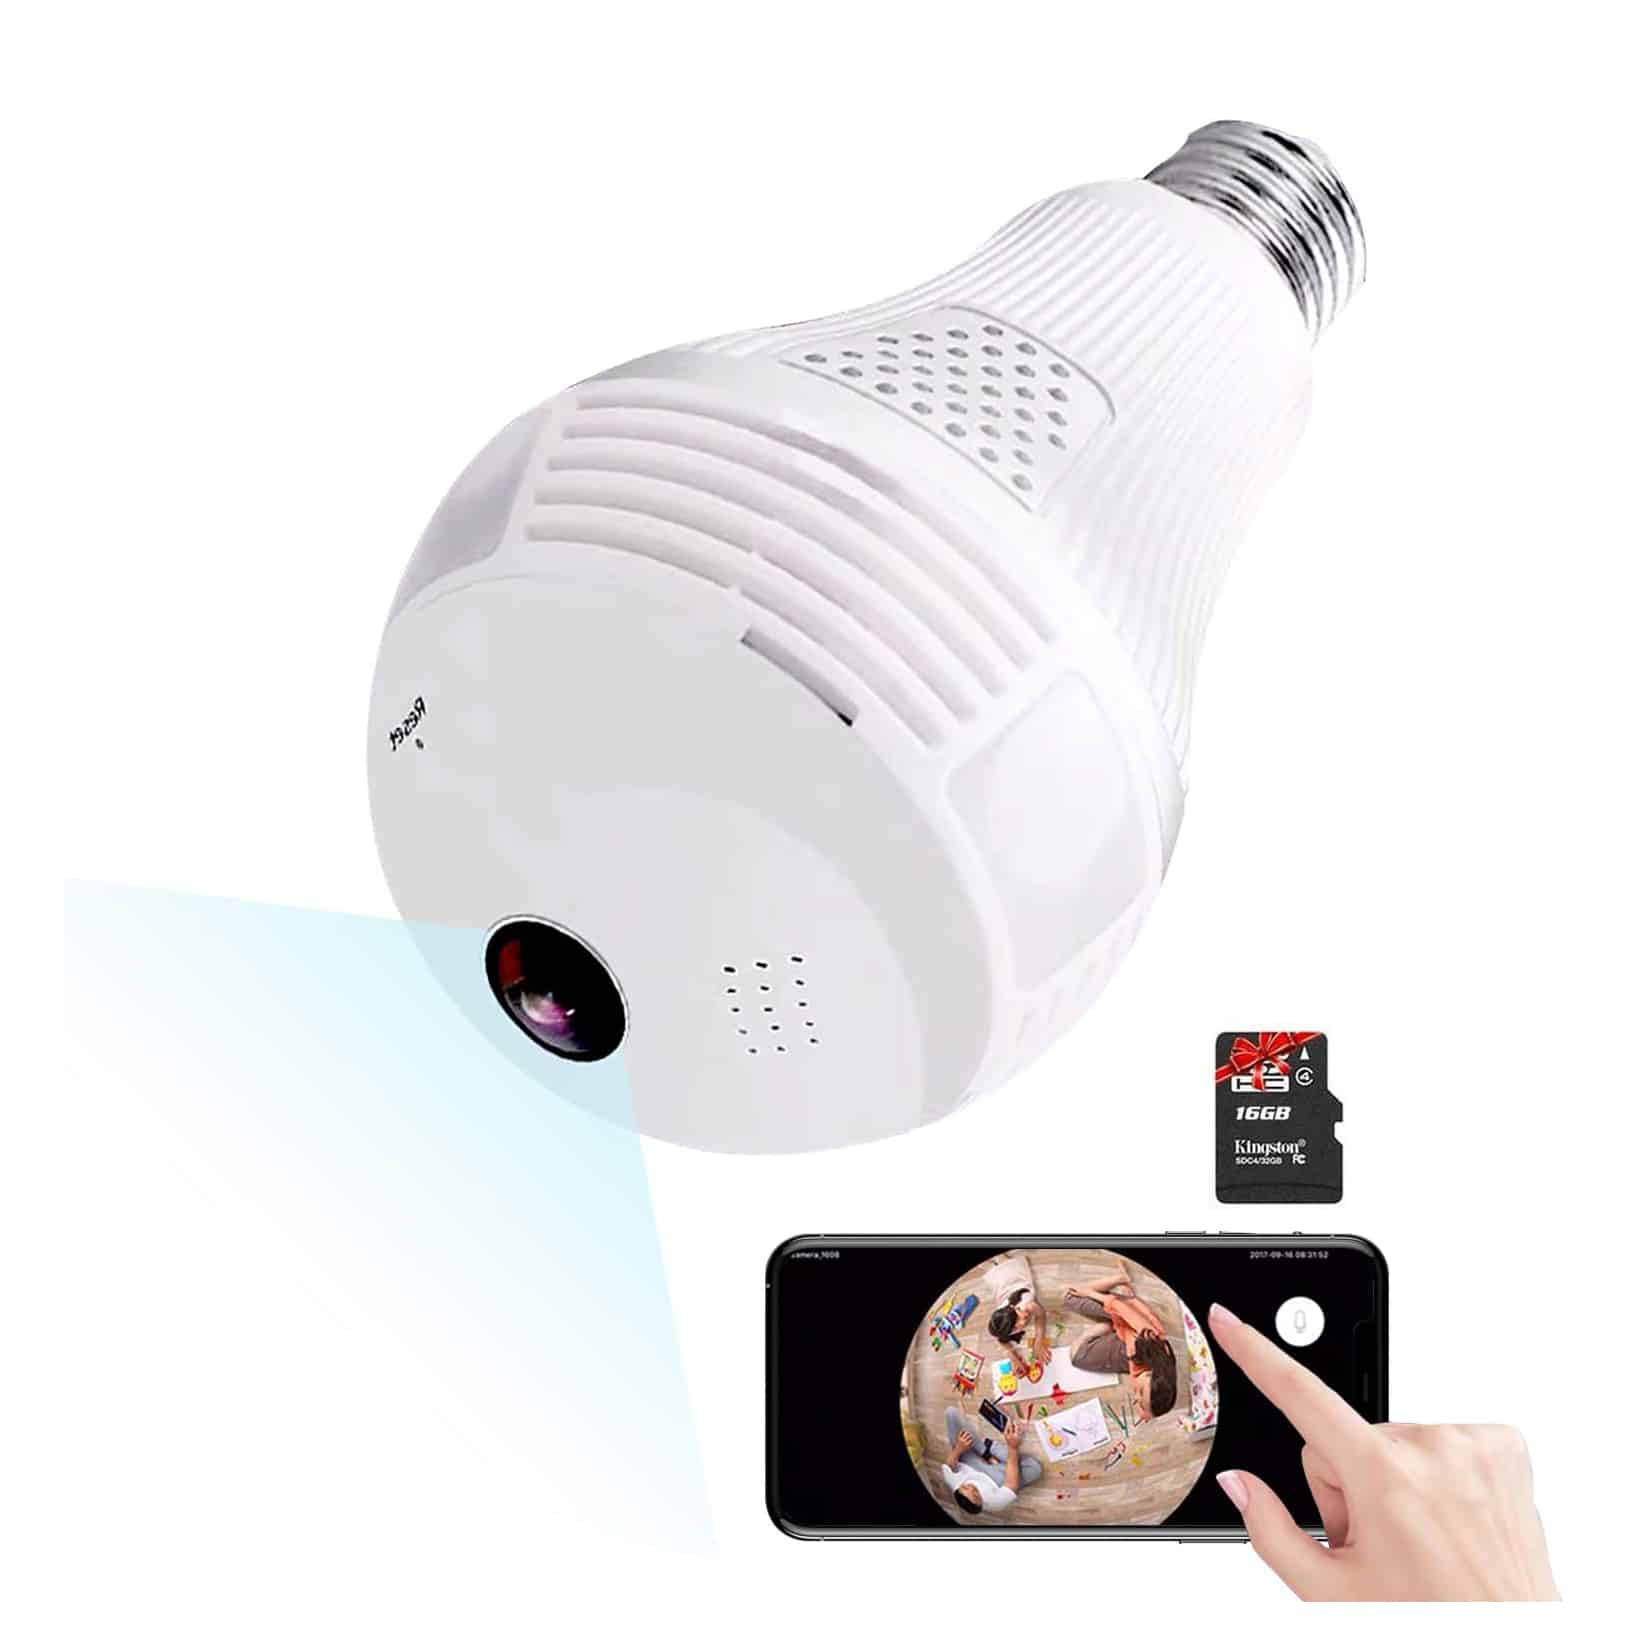 Top 10 Best Light Bulb Cameras in 2021 Reviews Guide Me